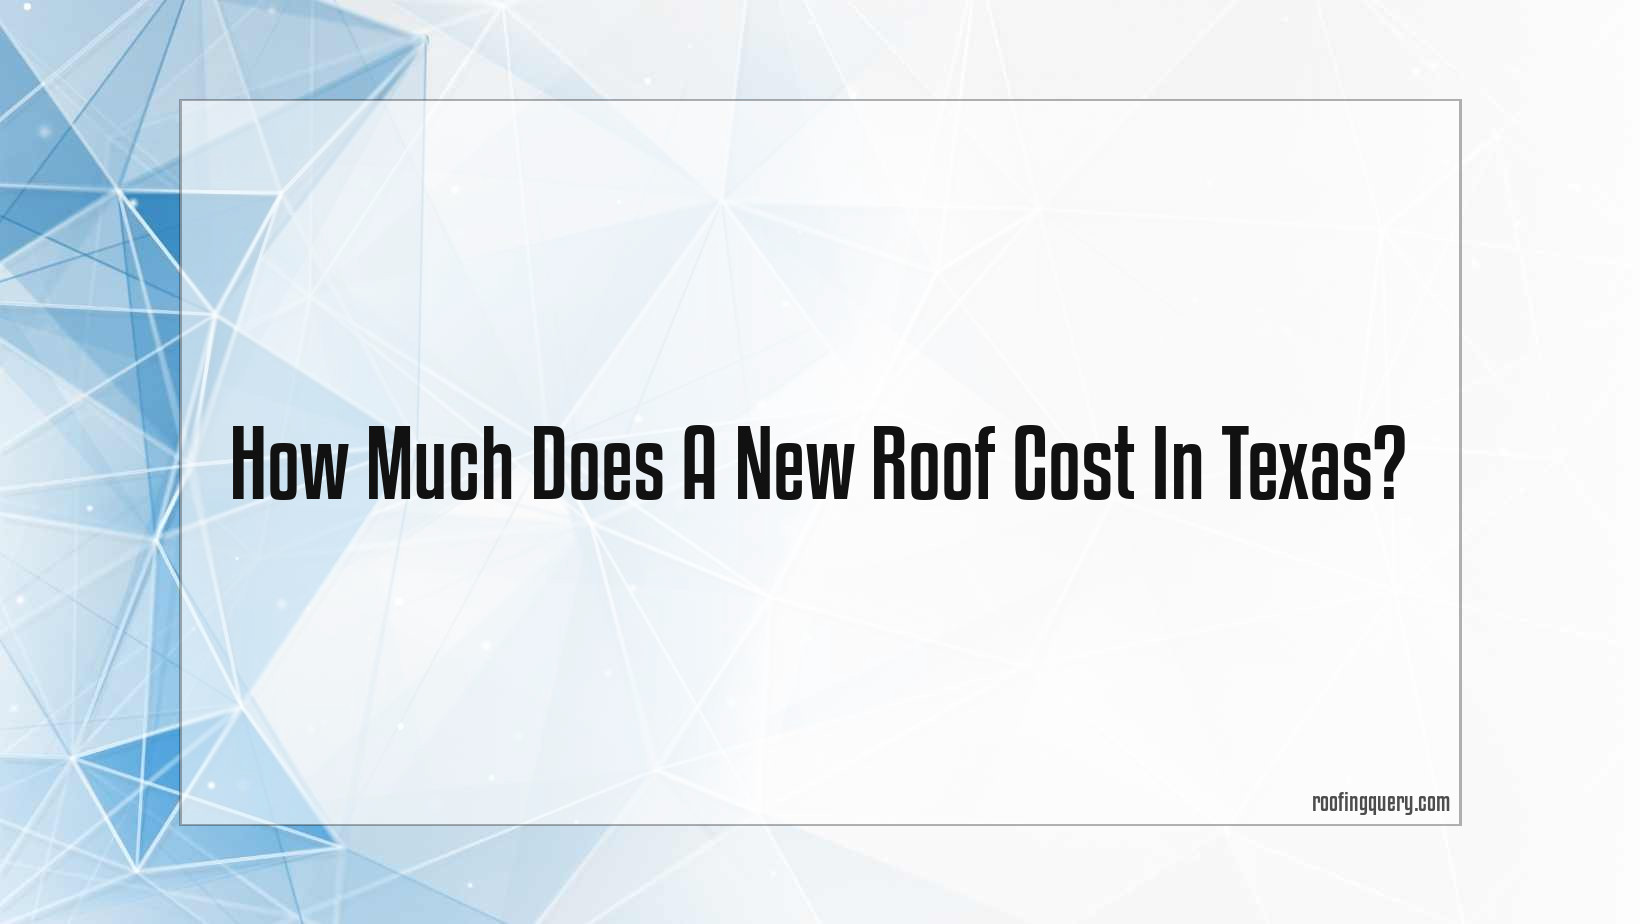 How Much Does A New Roof Cost In Texas?